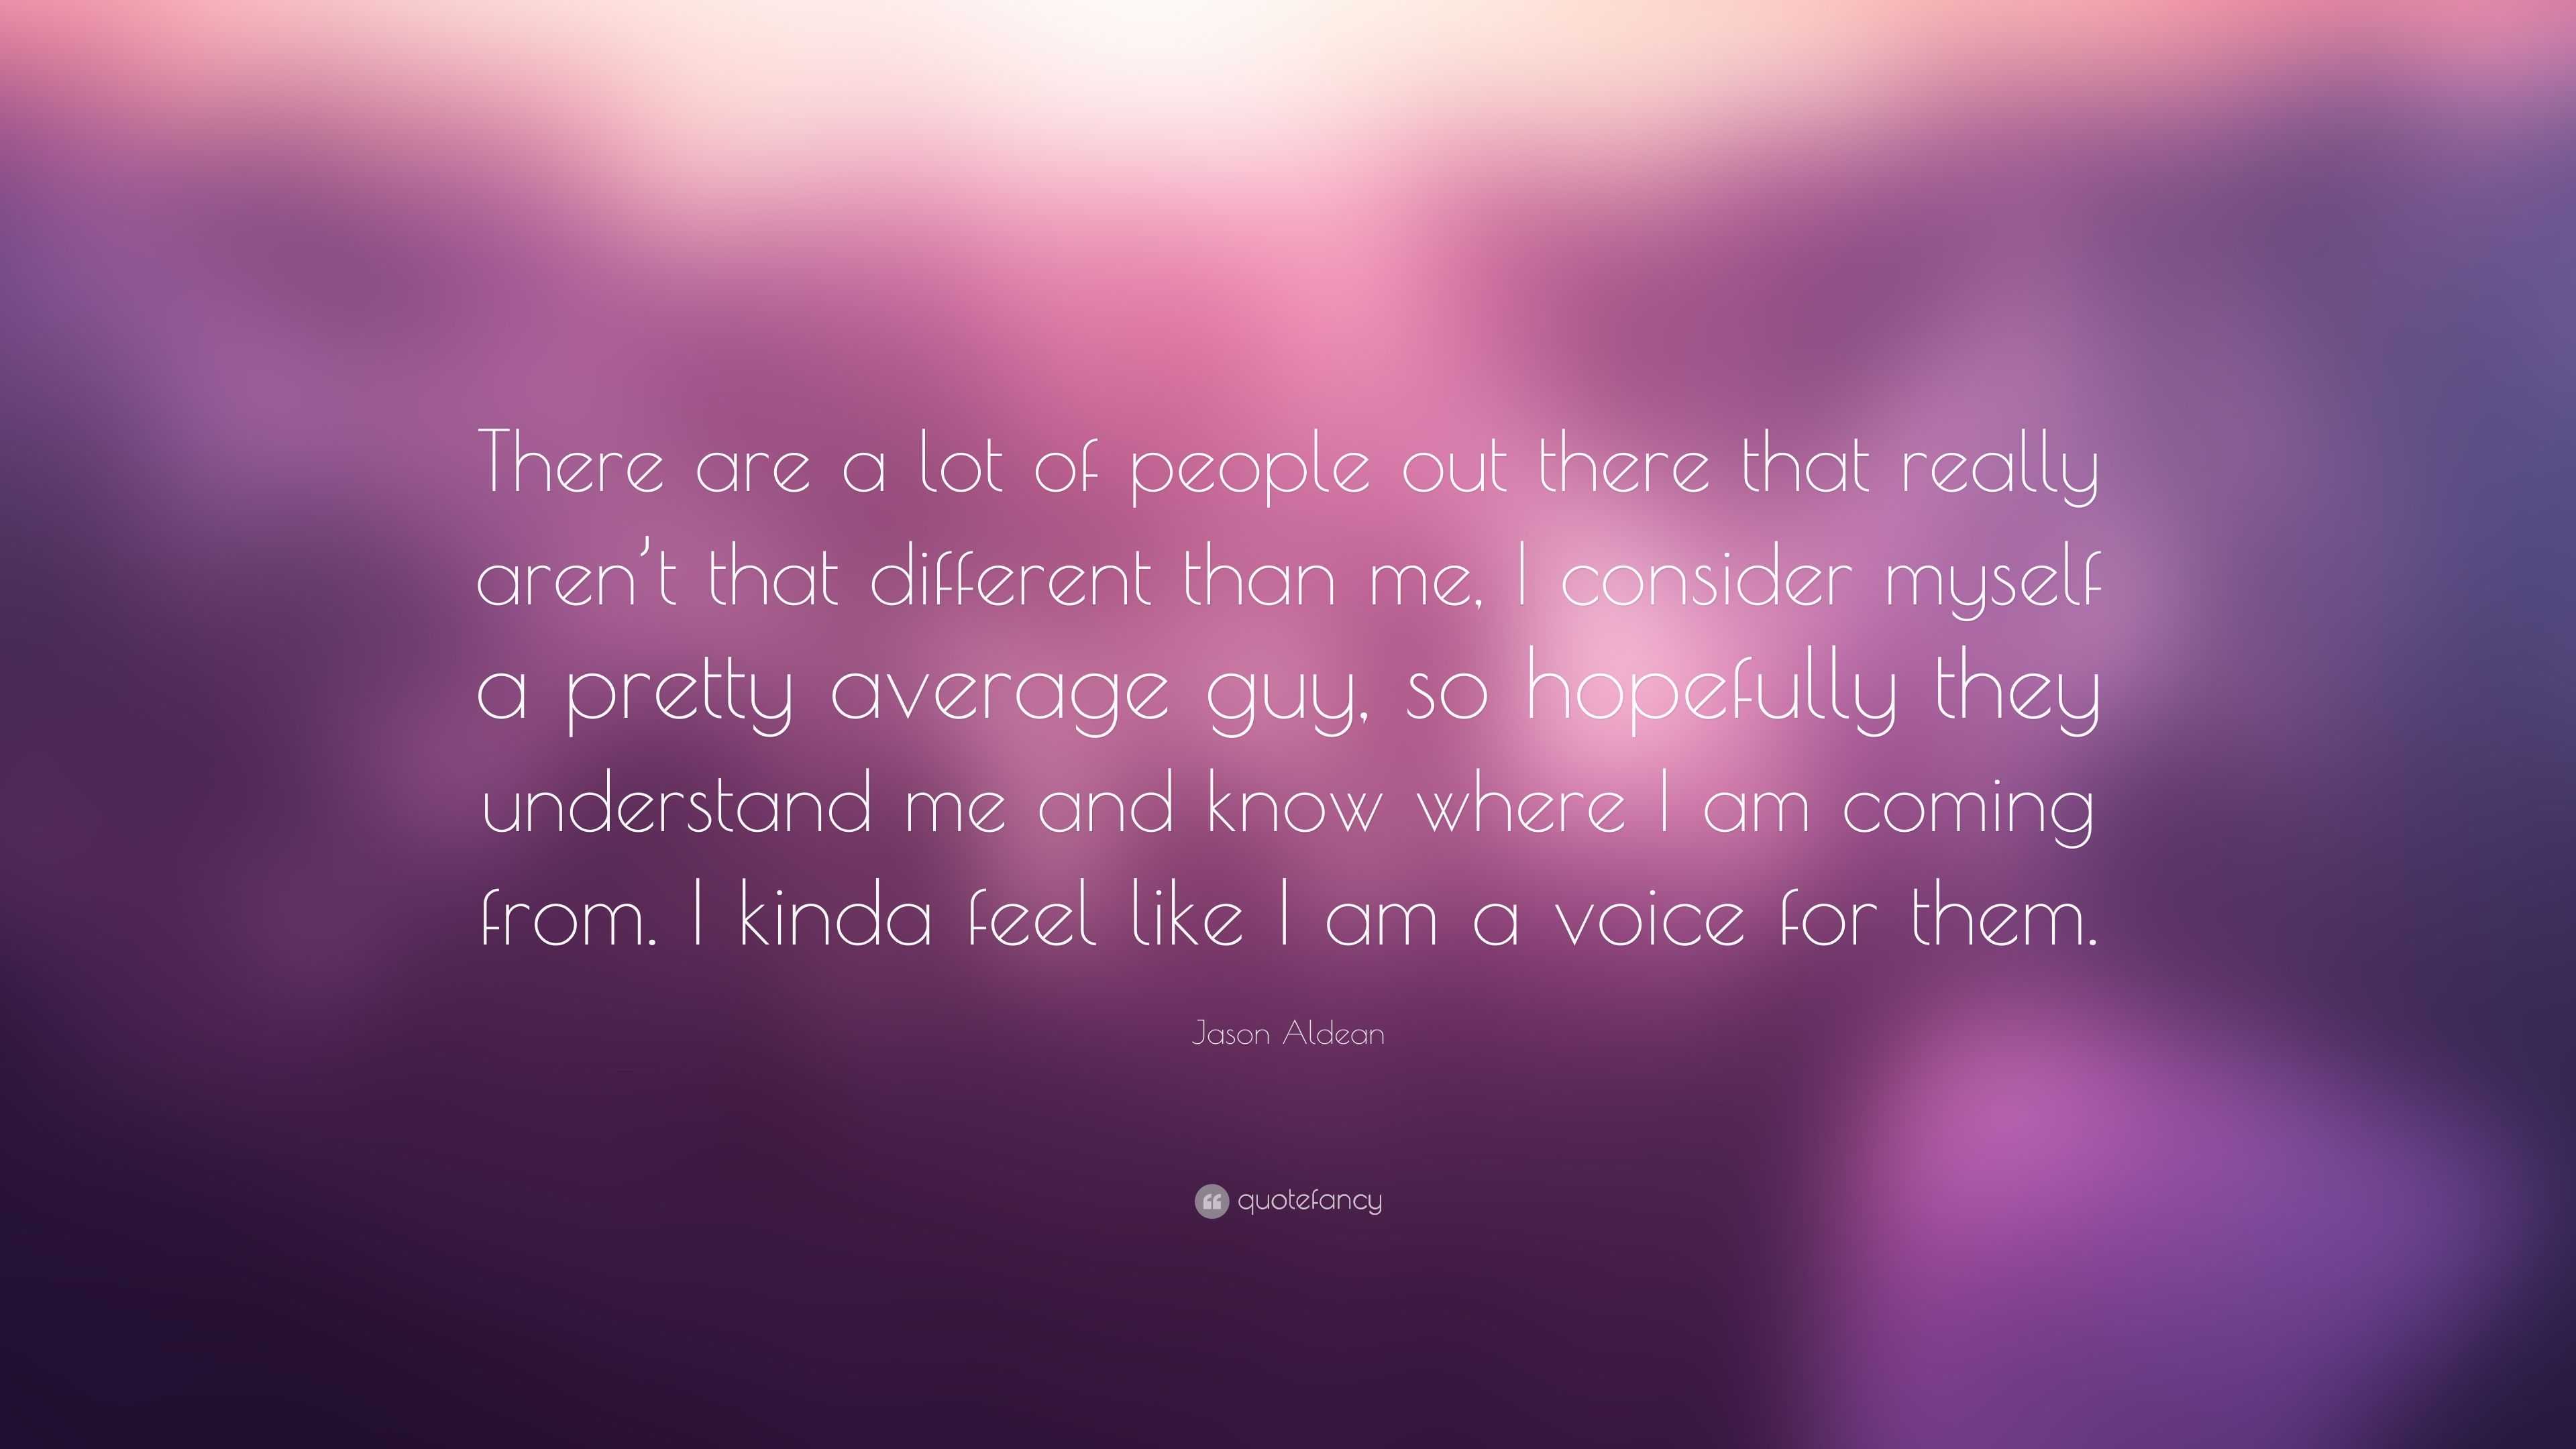 Jason Aldean Quote: “There are a lot of people out there that really aren't  that different than me, I consider myself a pretty average guy, s”